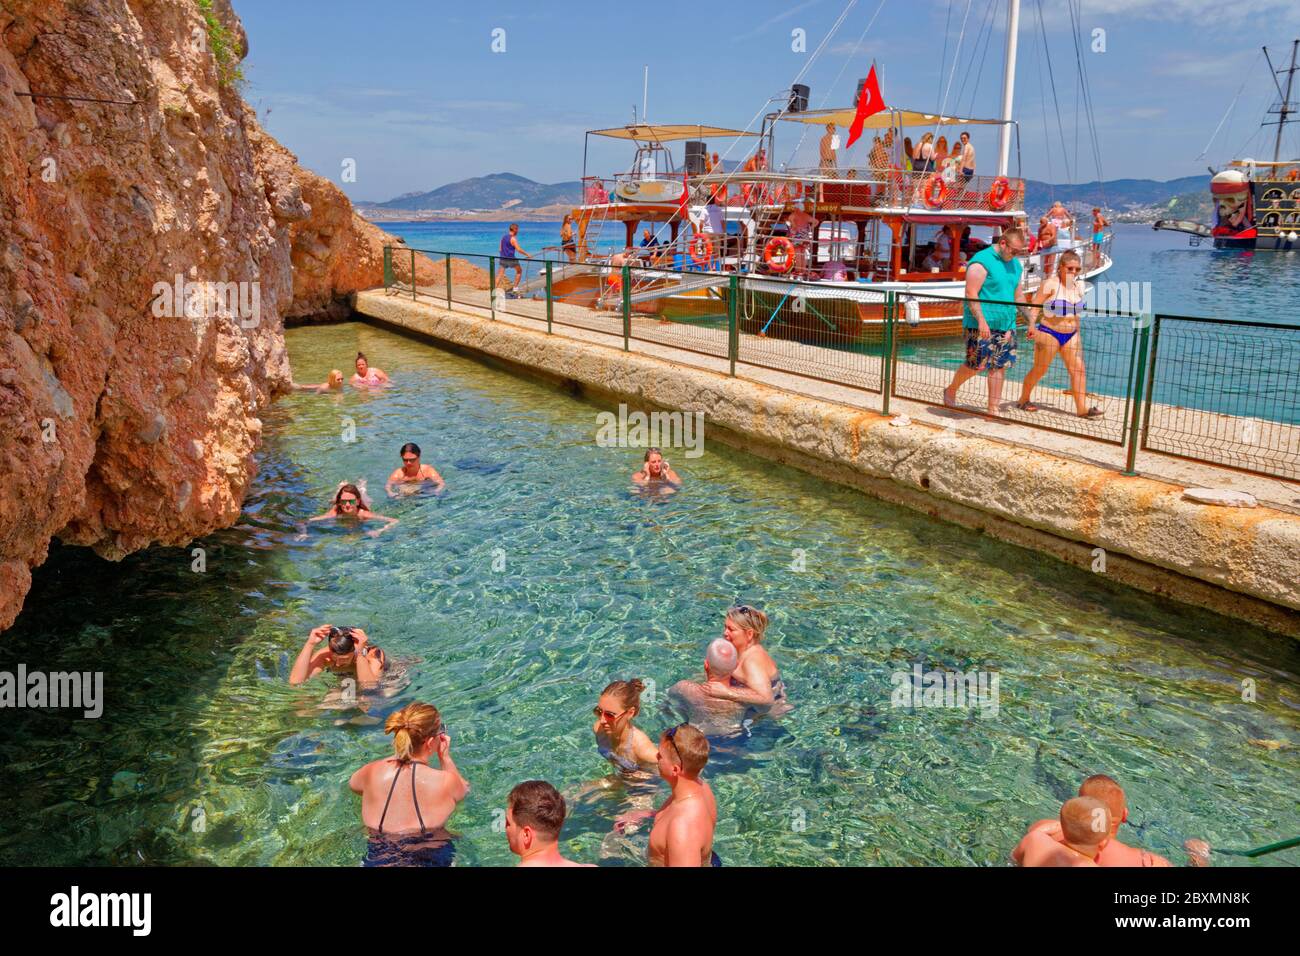 Cleopatra's cave and hot spring pool on Black island opposite Bodrum town in Mugla Province, Turkey. Stock Photo